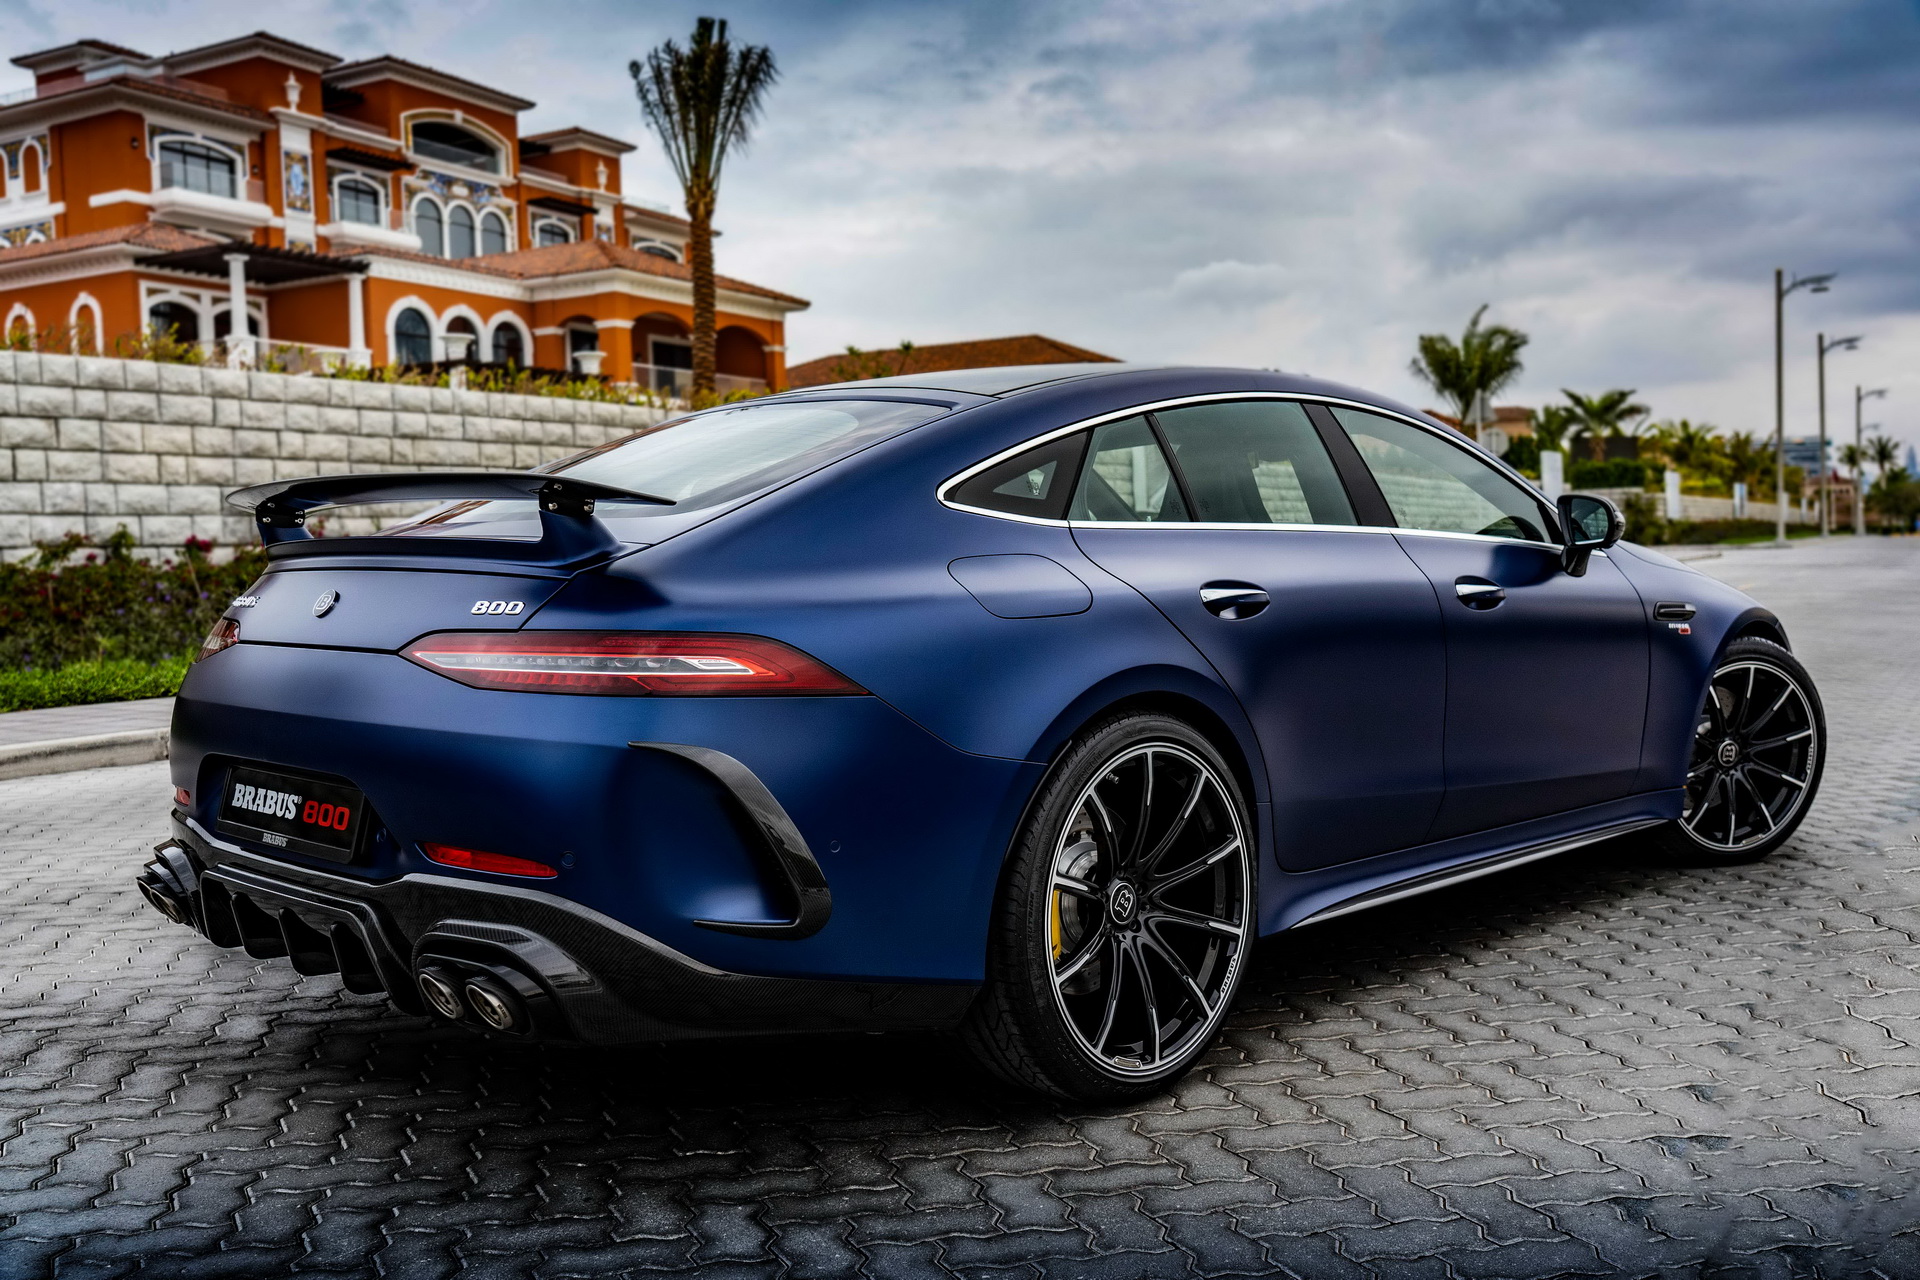 Gt 63. Mercedes AMG gt 63. Мерседес-Бенц AMG gt 63 s. Мерседес AMG gt 63s. Mercedes AMG gt 63s Coupe.